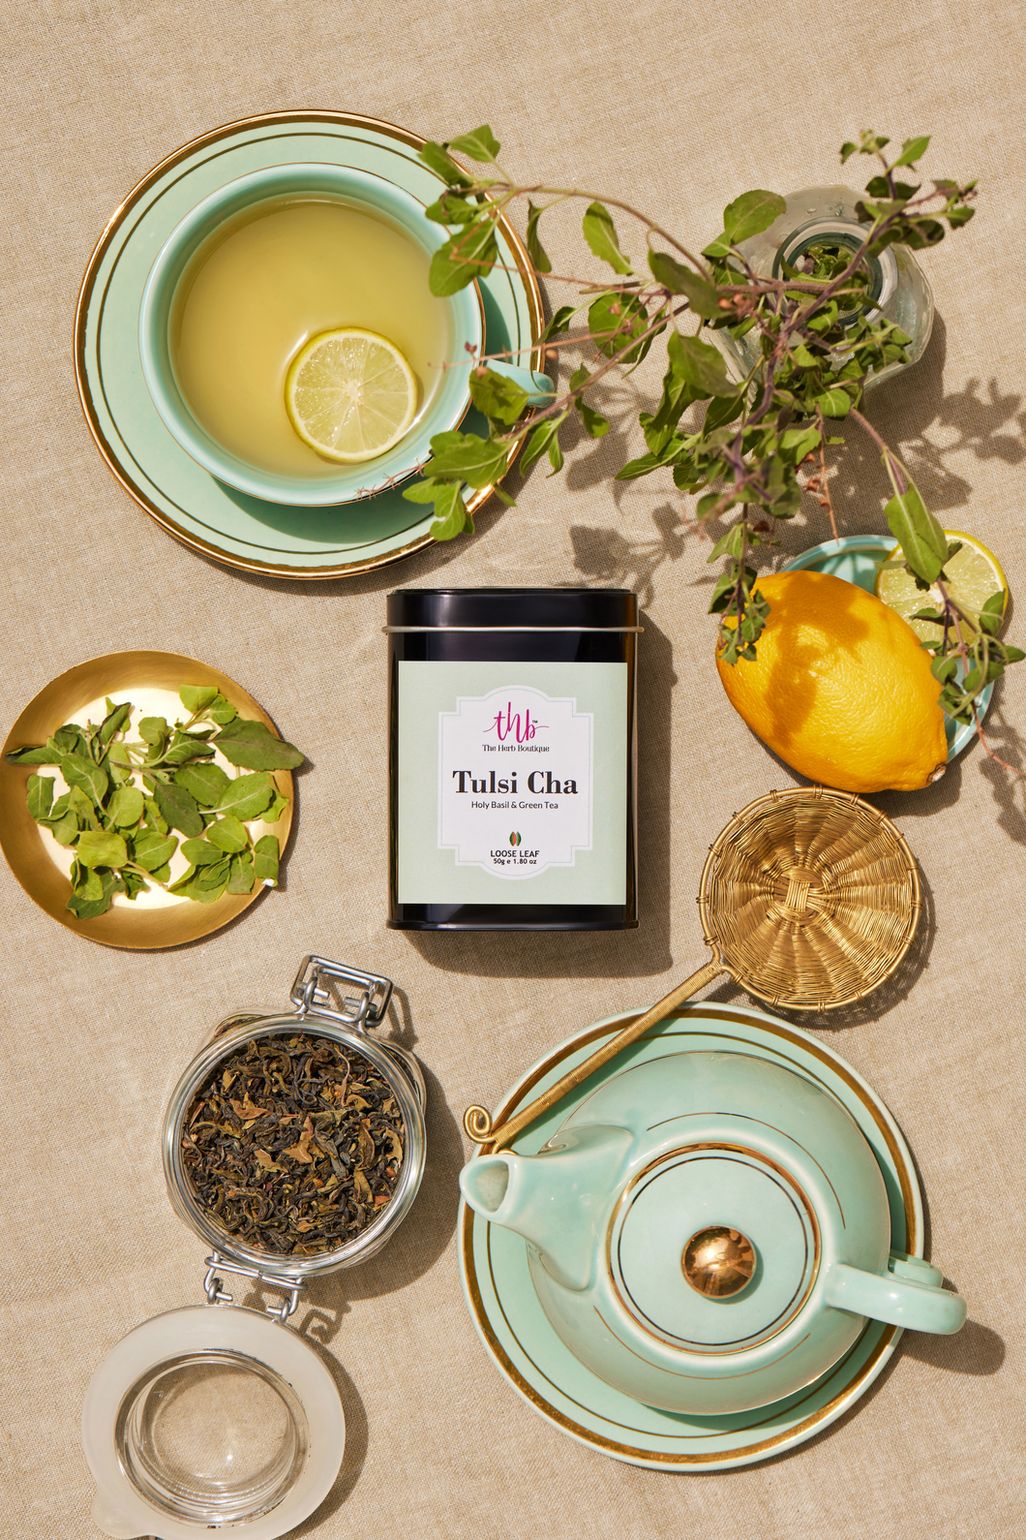 Product: The Herb Boutique Tulsi Chai